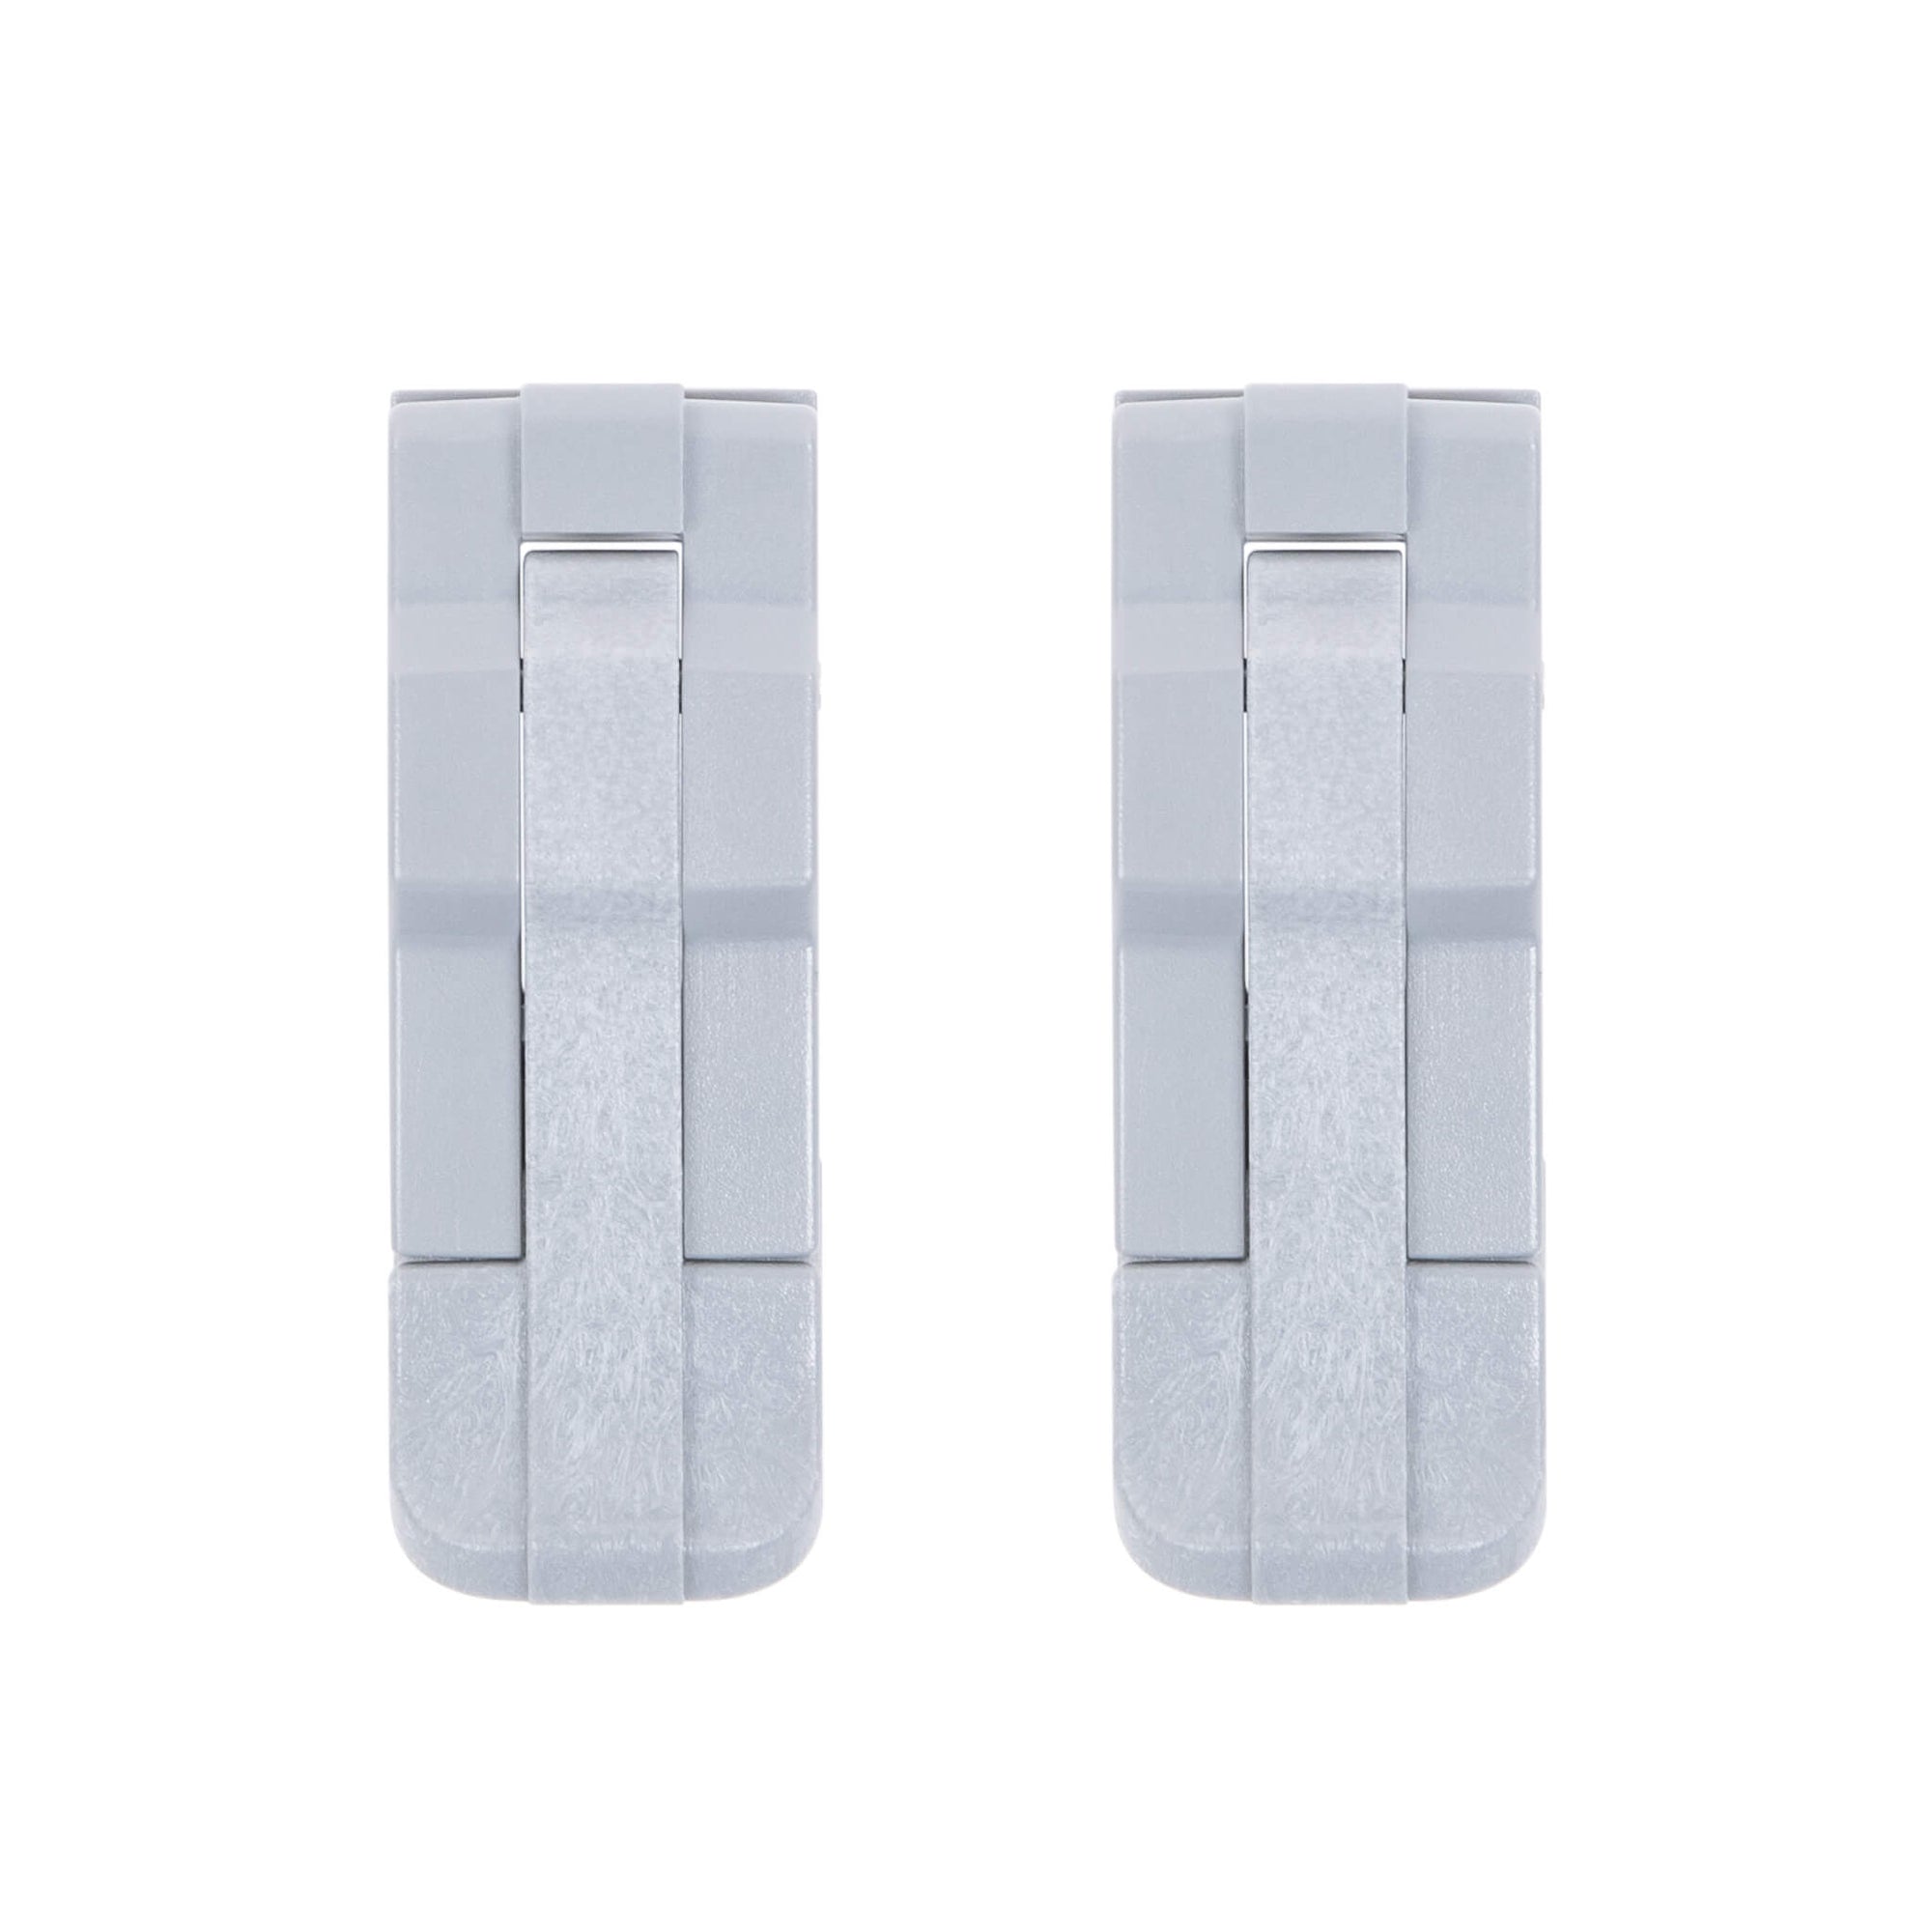 Pelican 1200 Replacement Latches, Silver (Set of 2) ColorCase 